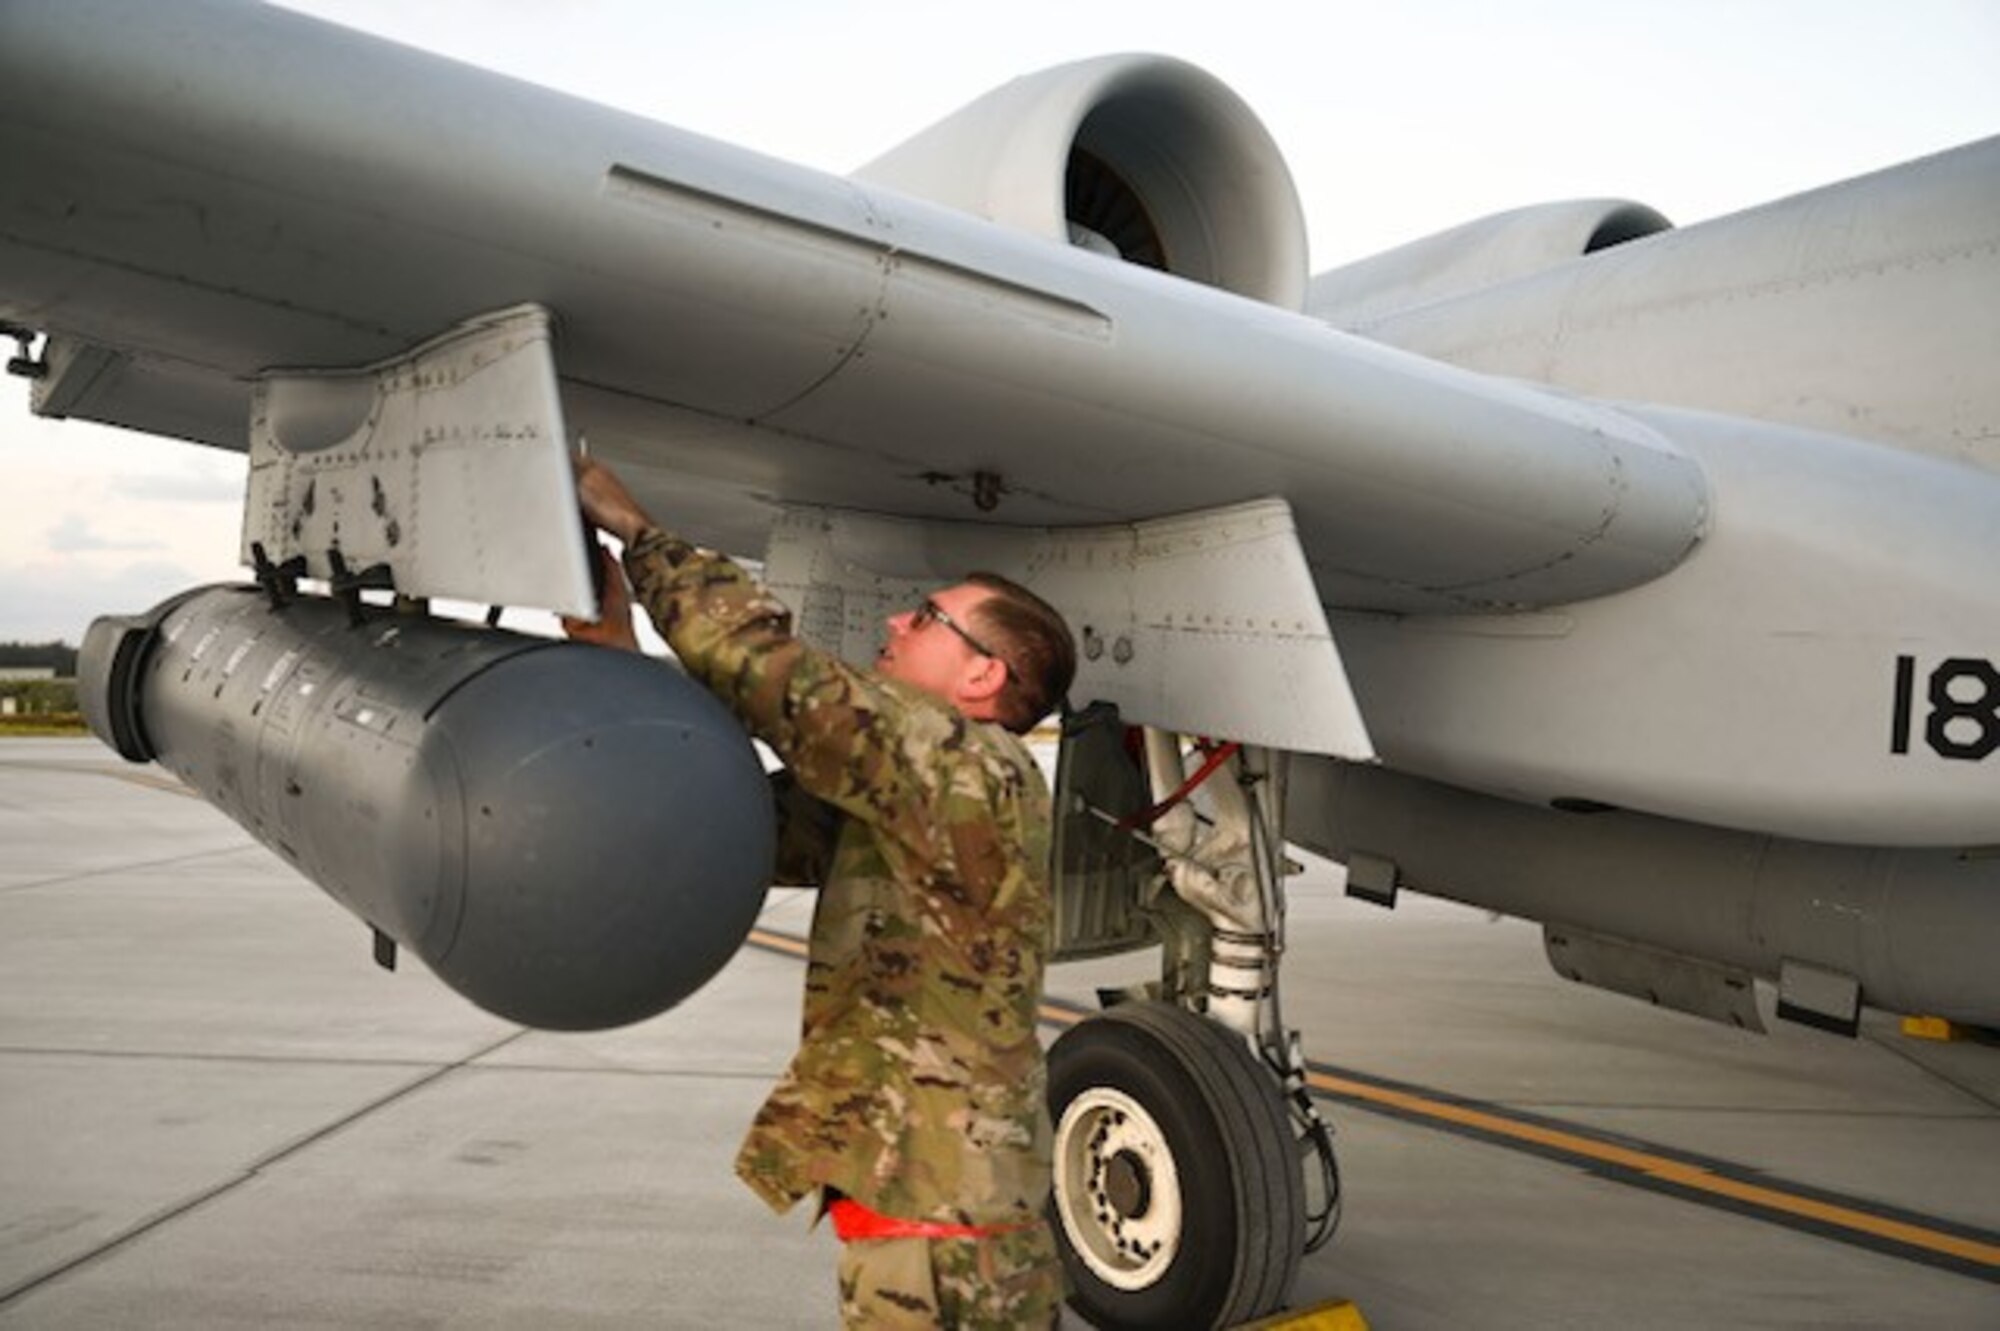 Master Sgt. Robert Jones, an AATC Avionics Technician based out of Davis-Monthan Air Force Base, Ariz., prepares an A-10 for the return flight from Wake Island Airfield to Joint Base Pearl Harbor-Hickam, Hawaii. The A-10s were an integral part of Exercise KANI WILDCAT, a multi-faceted ACE exercise that allowed for several testing events and integration with Air Force Special Warfare operators, A-10s, C-130s, F-22s, MV-22s, UH-1Ns, and CH-53s.